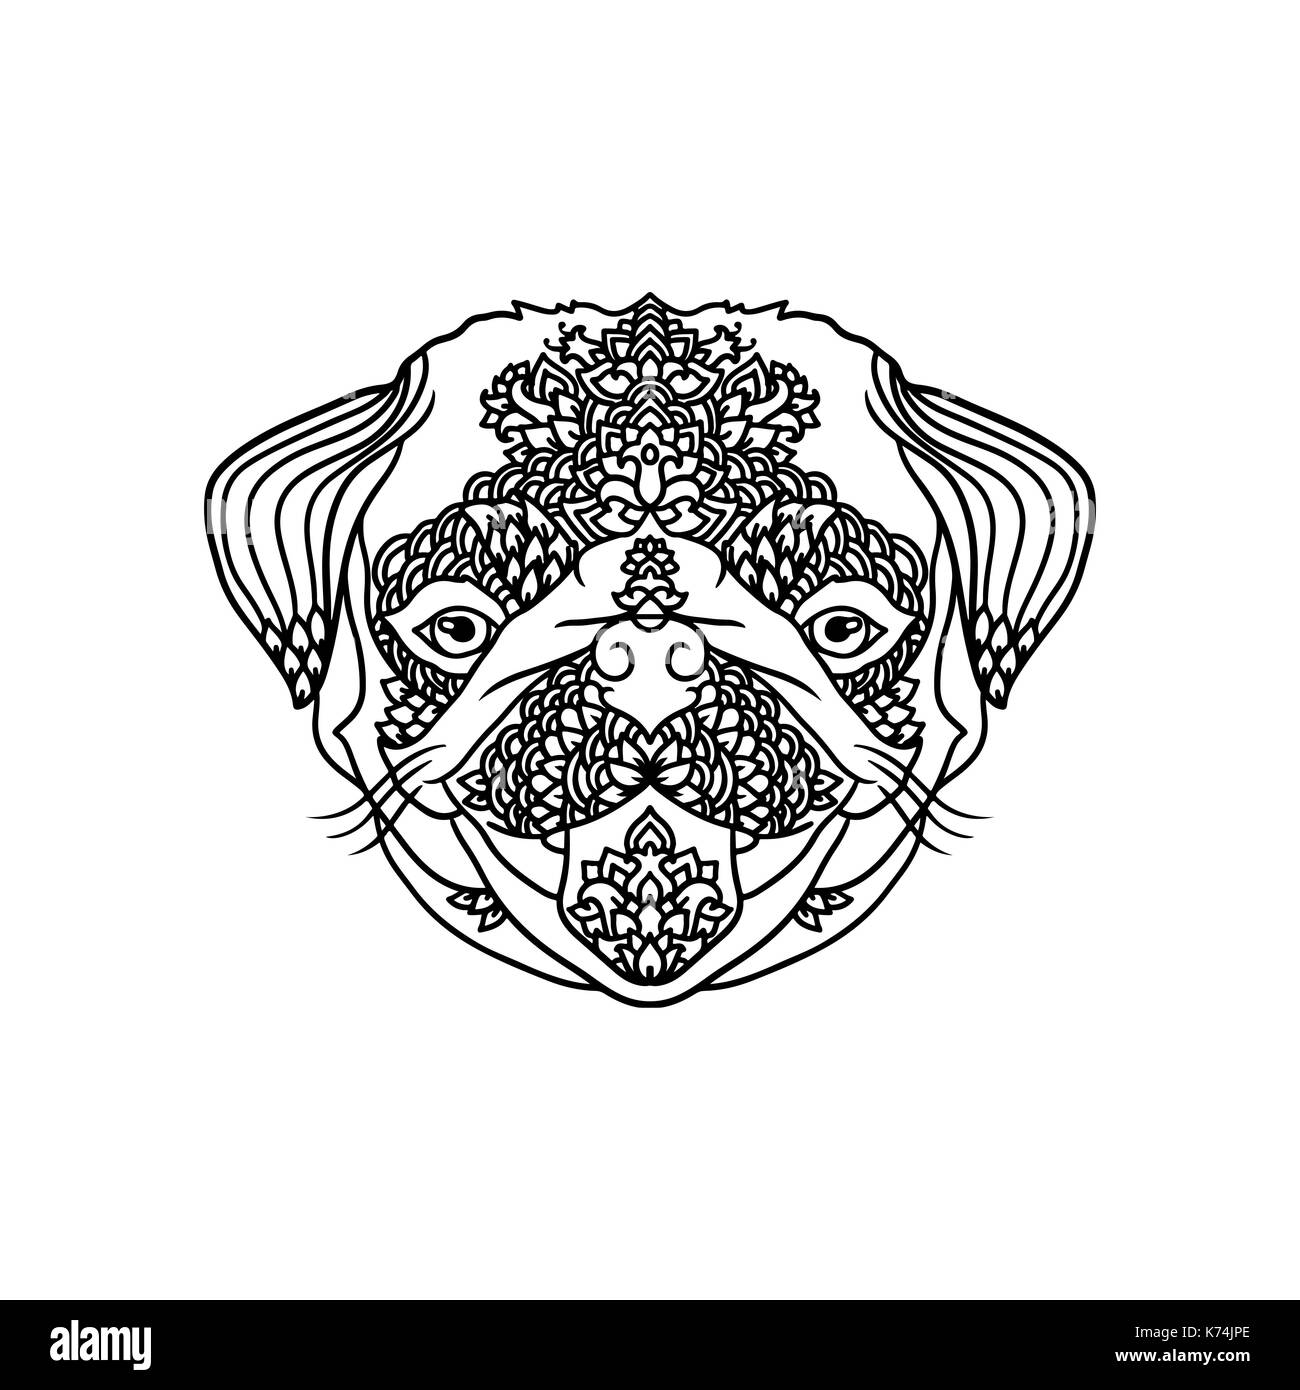 Black and wite pug with ethnic floral ornaments for adult coloring book. Zentagle pattern. Vector doodle illustration. Portrait of a cute pet. Stock Vector